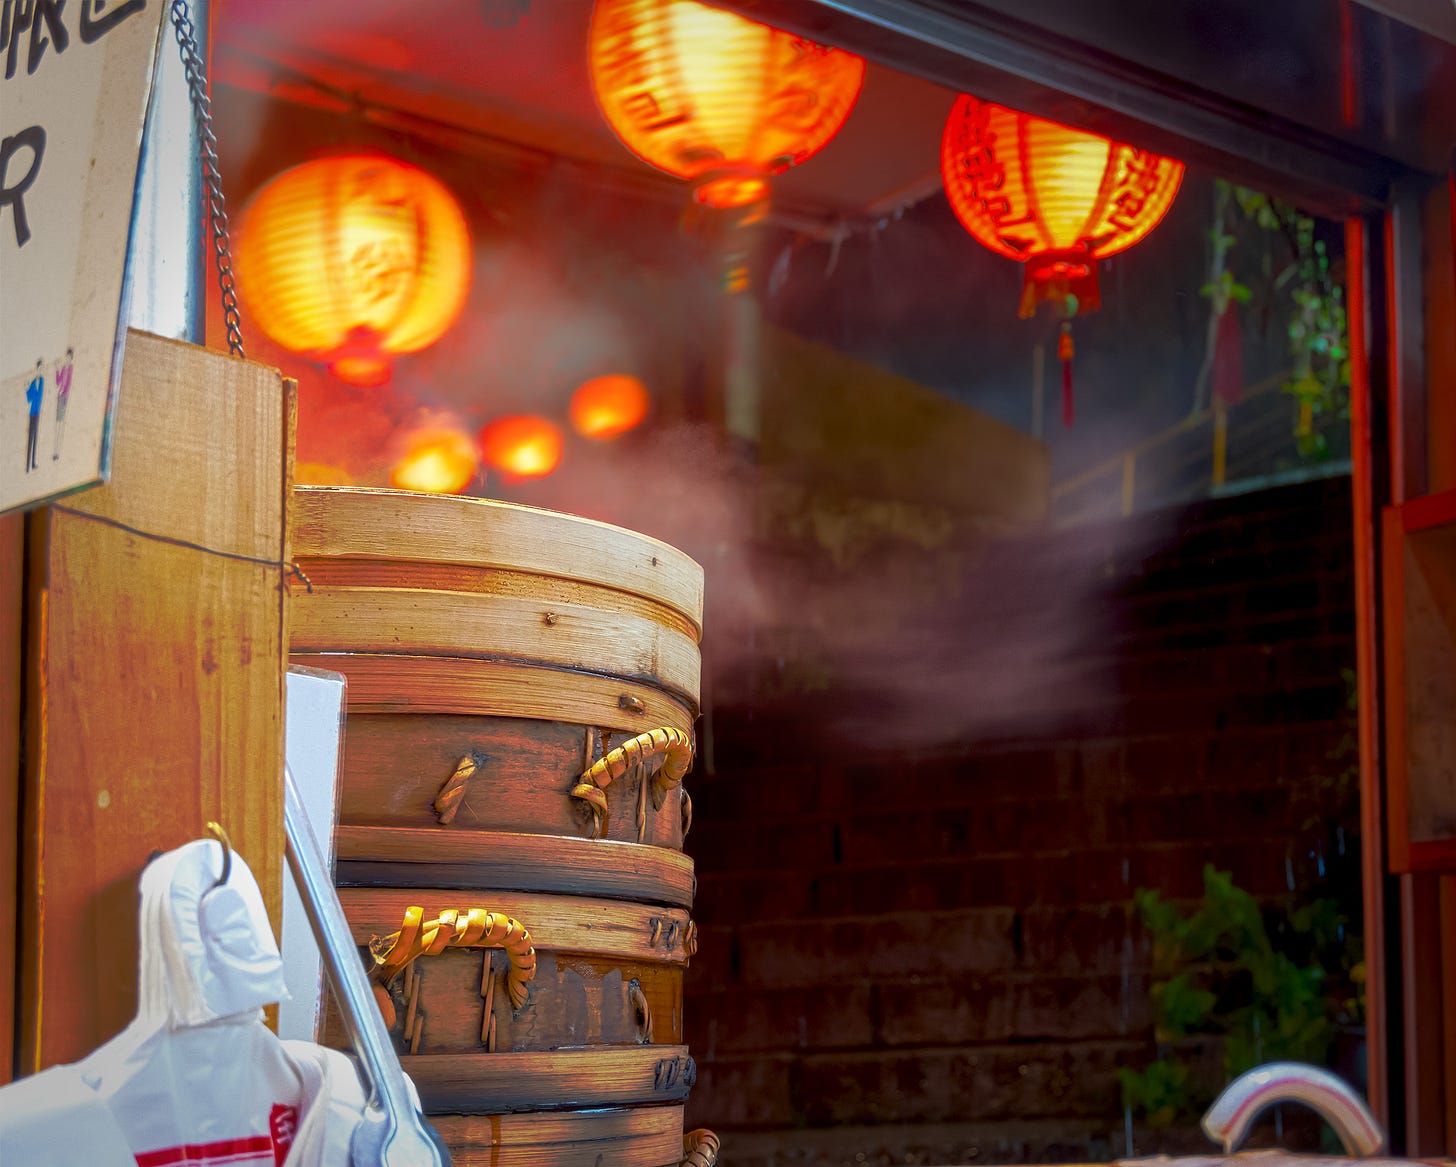 Steam billows from bamboo dumpling steamers and red lanterns wave in the wind of a nighttime rainstorm in Jiufen 九份